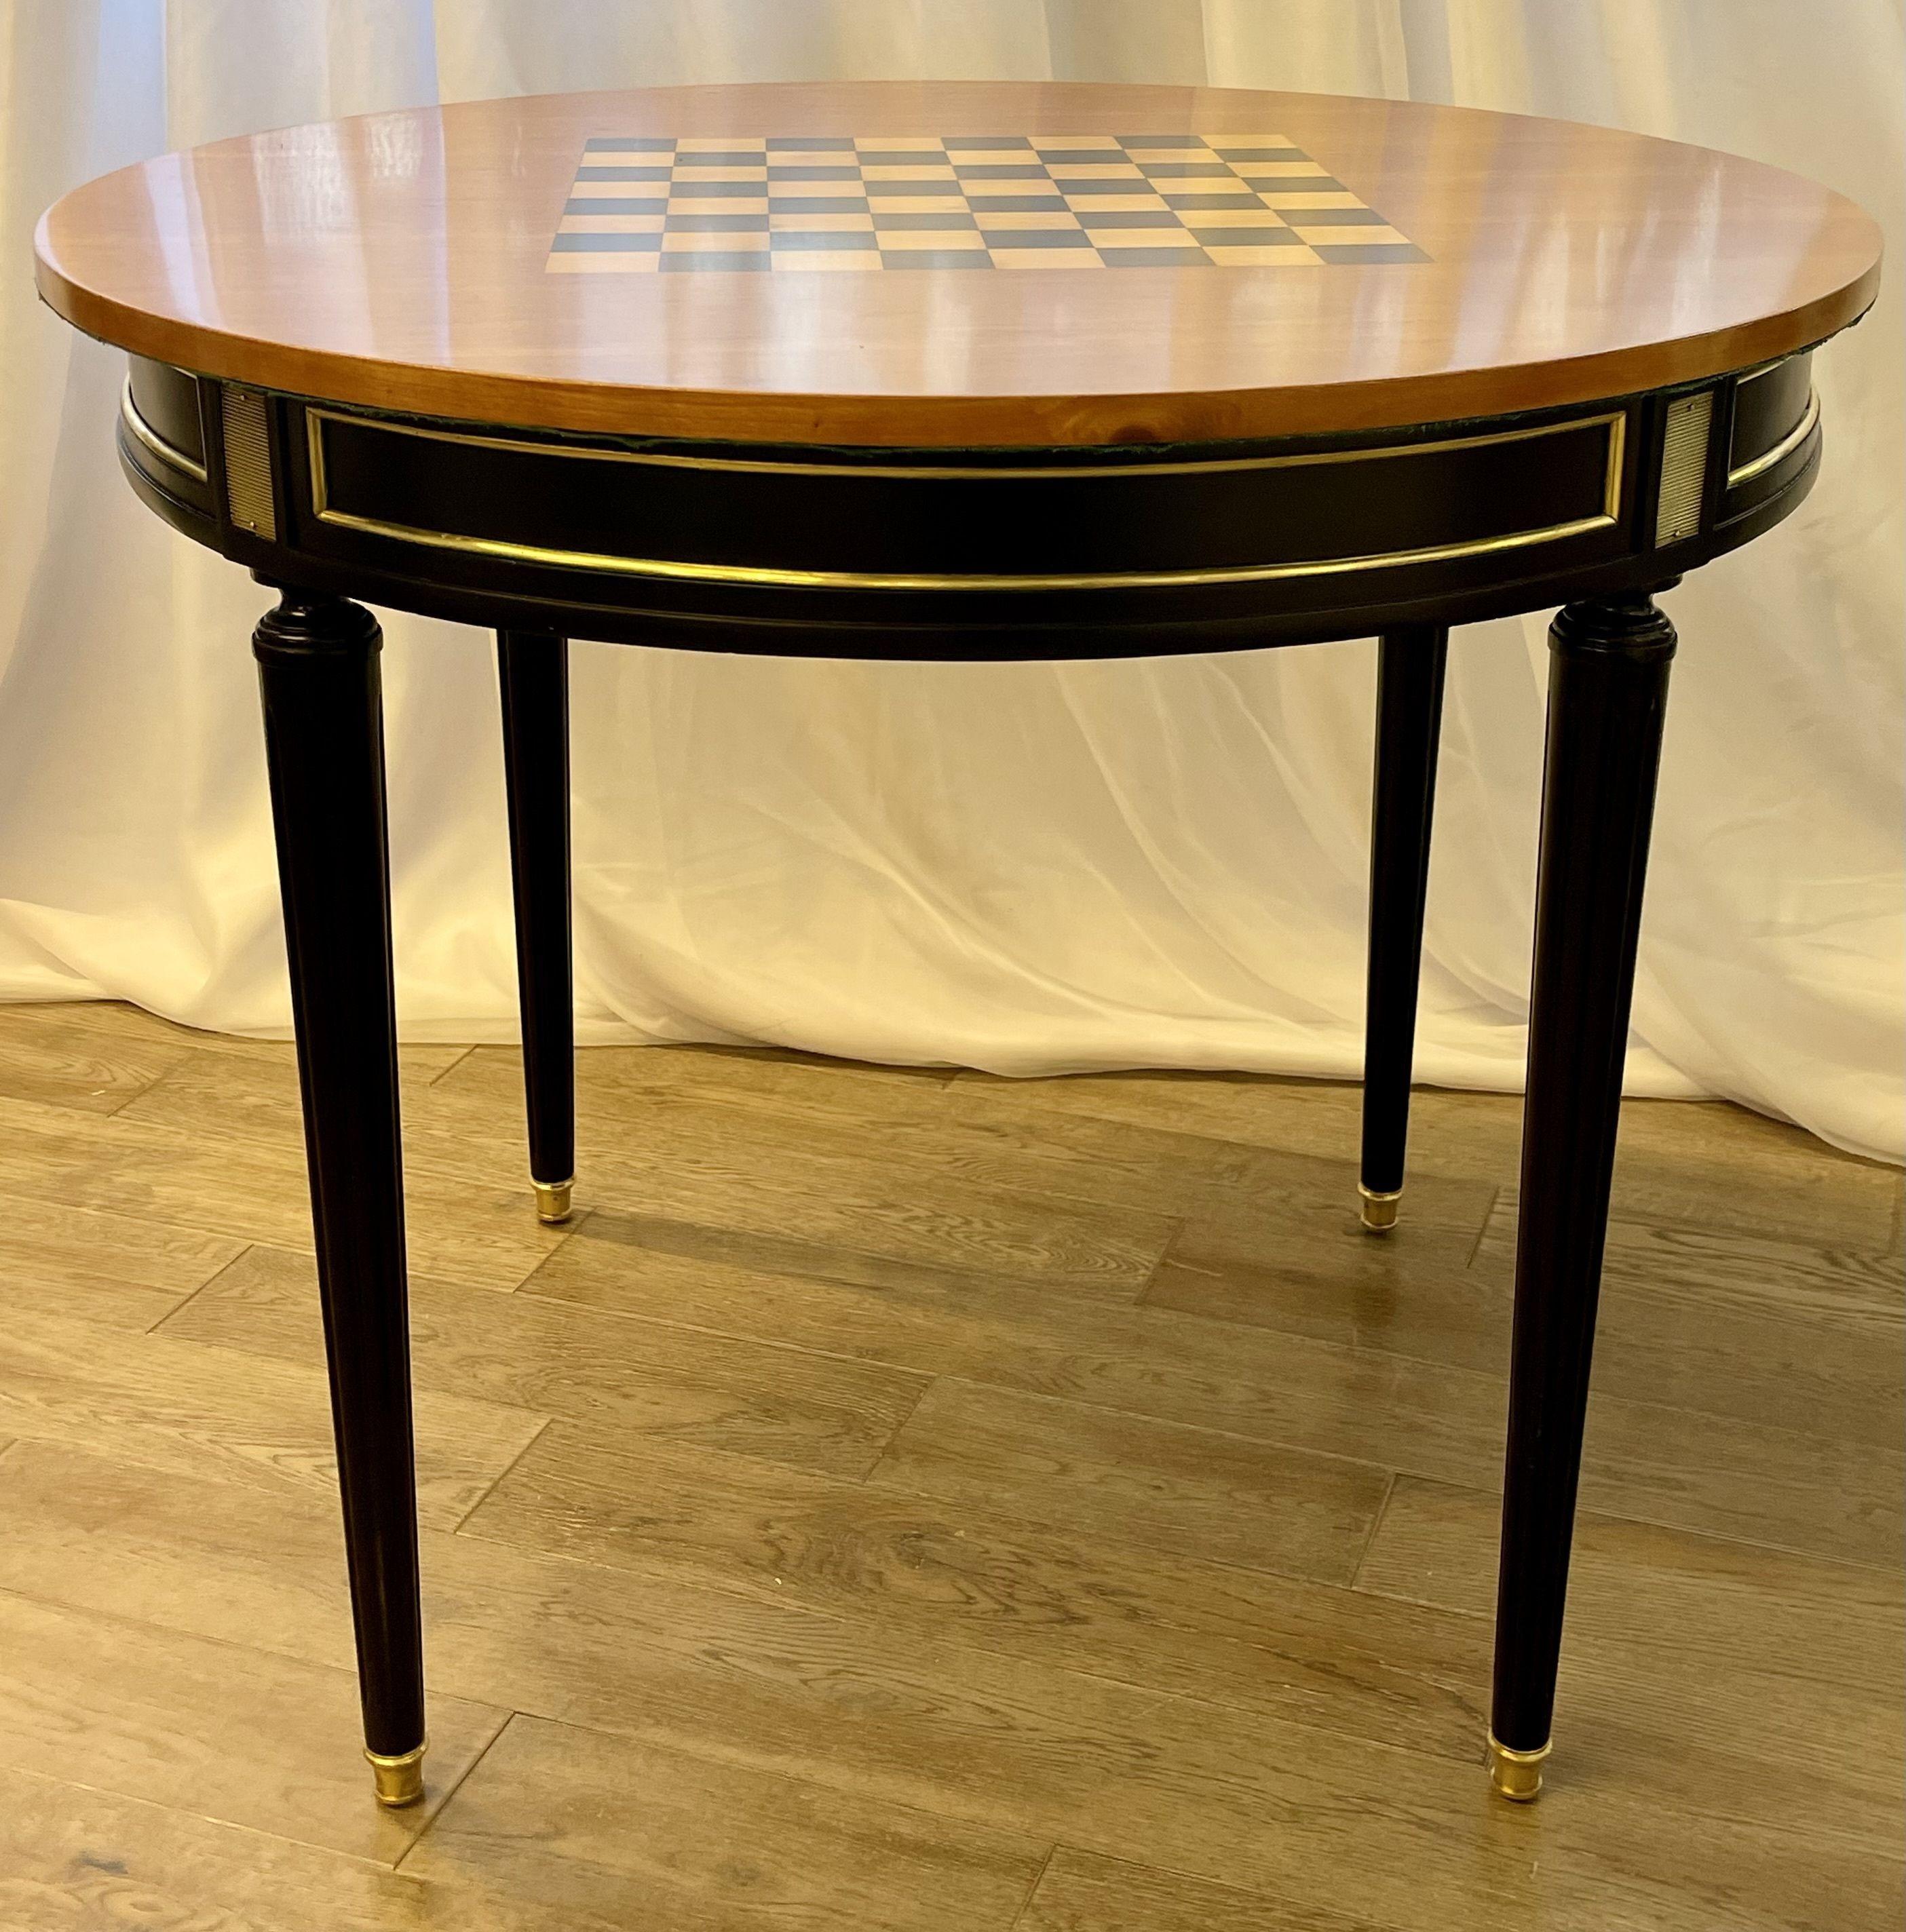 A Hollywood Regency Ebony Game or Card Table having a finely finished checkerboard top on one side and a card table felt on the opposite site. The sleek stylish tapering bronze mounted legs done in a fine ebony finish leading to an open storage